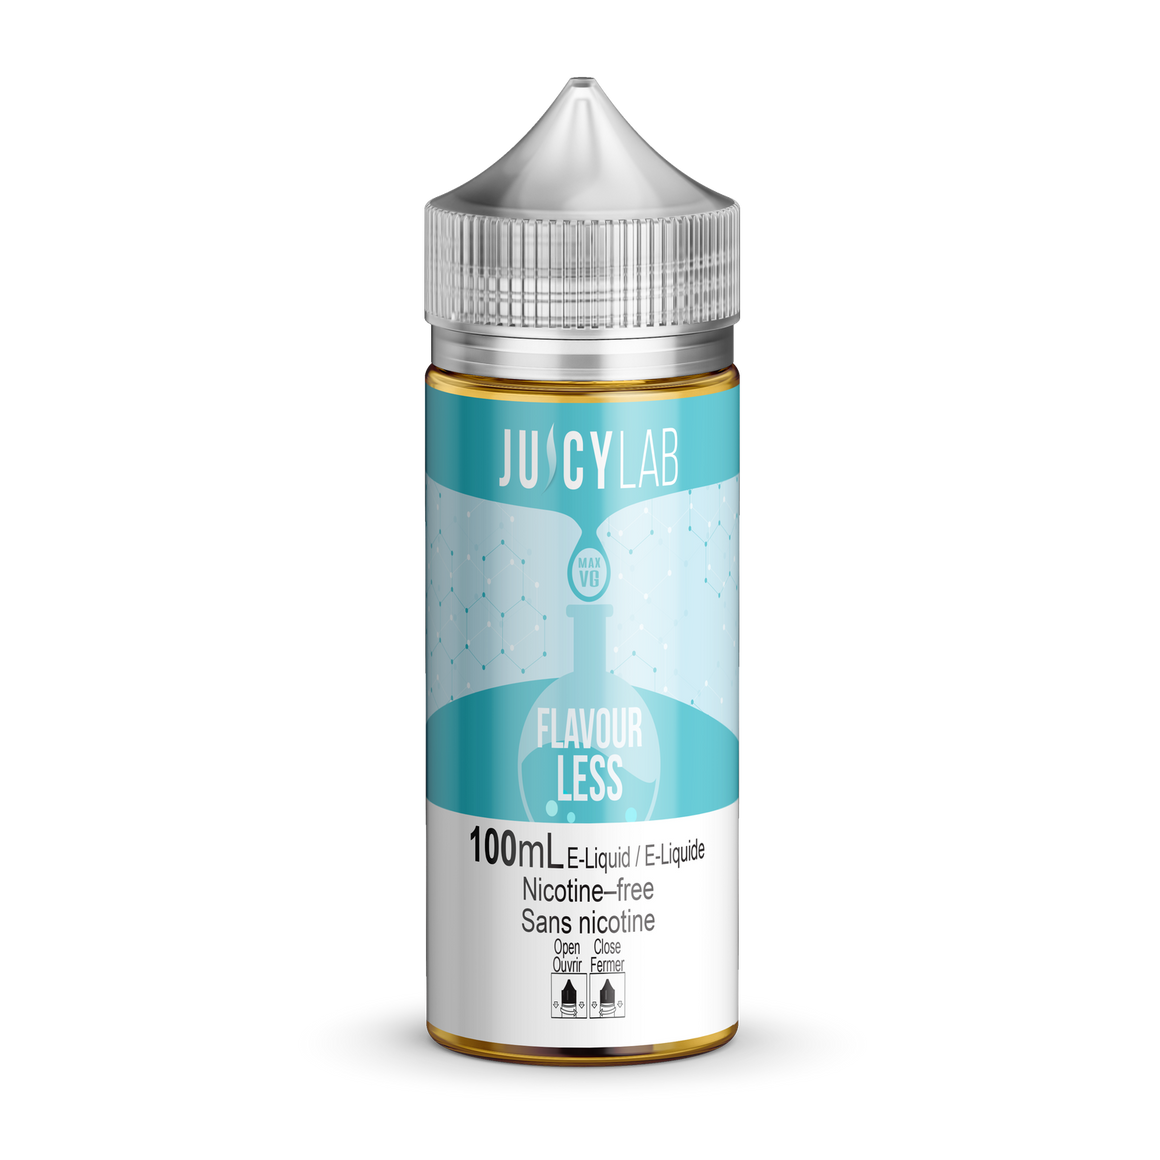 Juicy Lab Flavourless 100ml